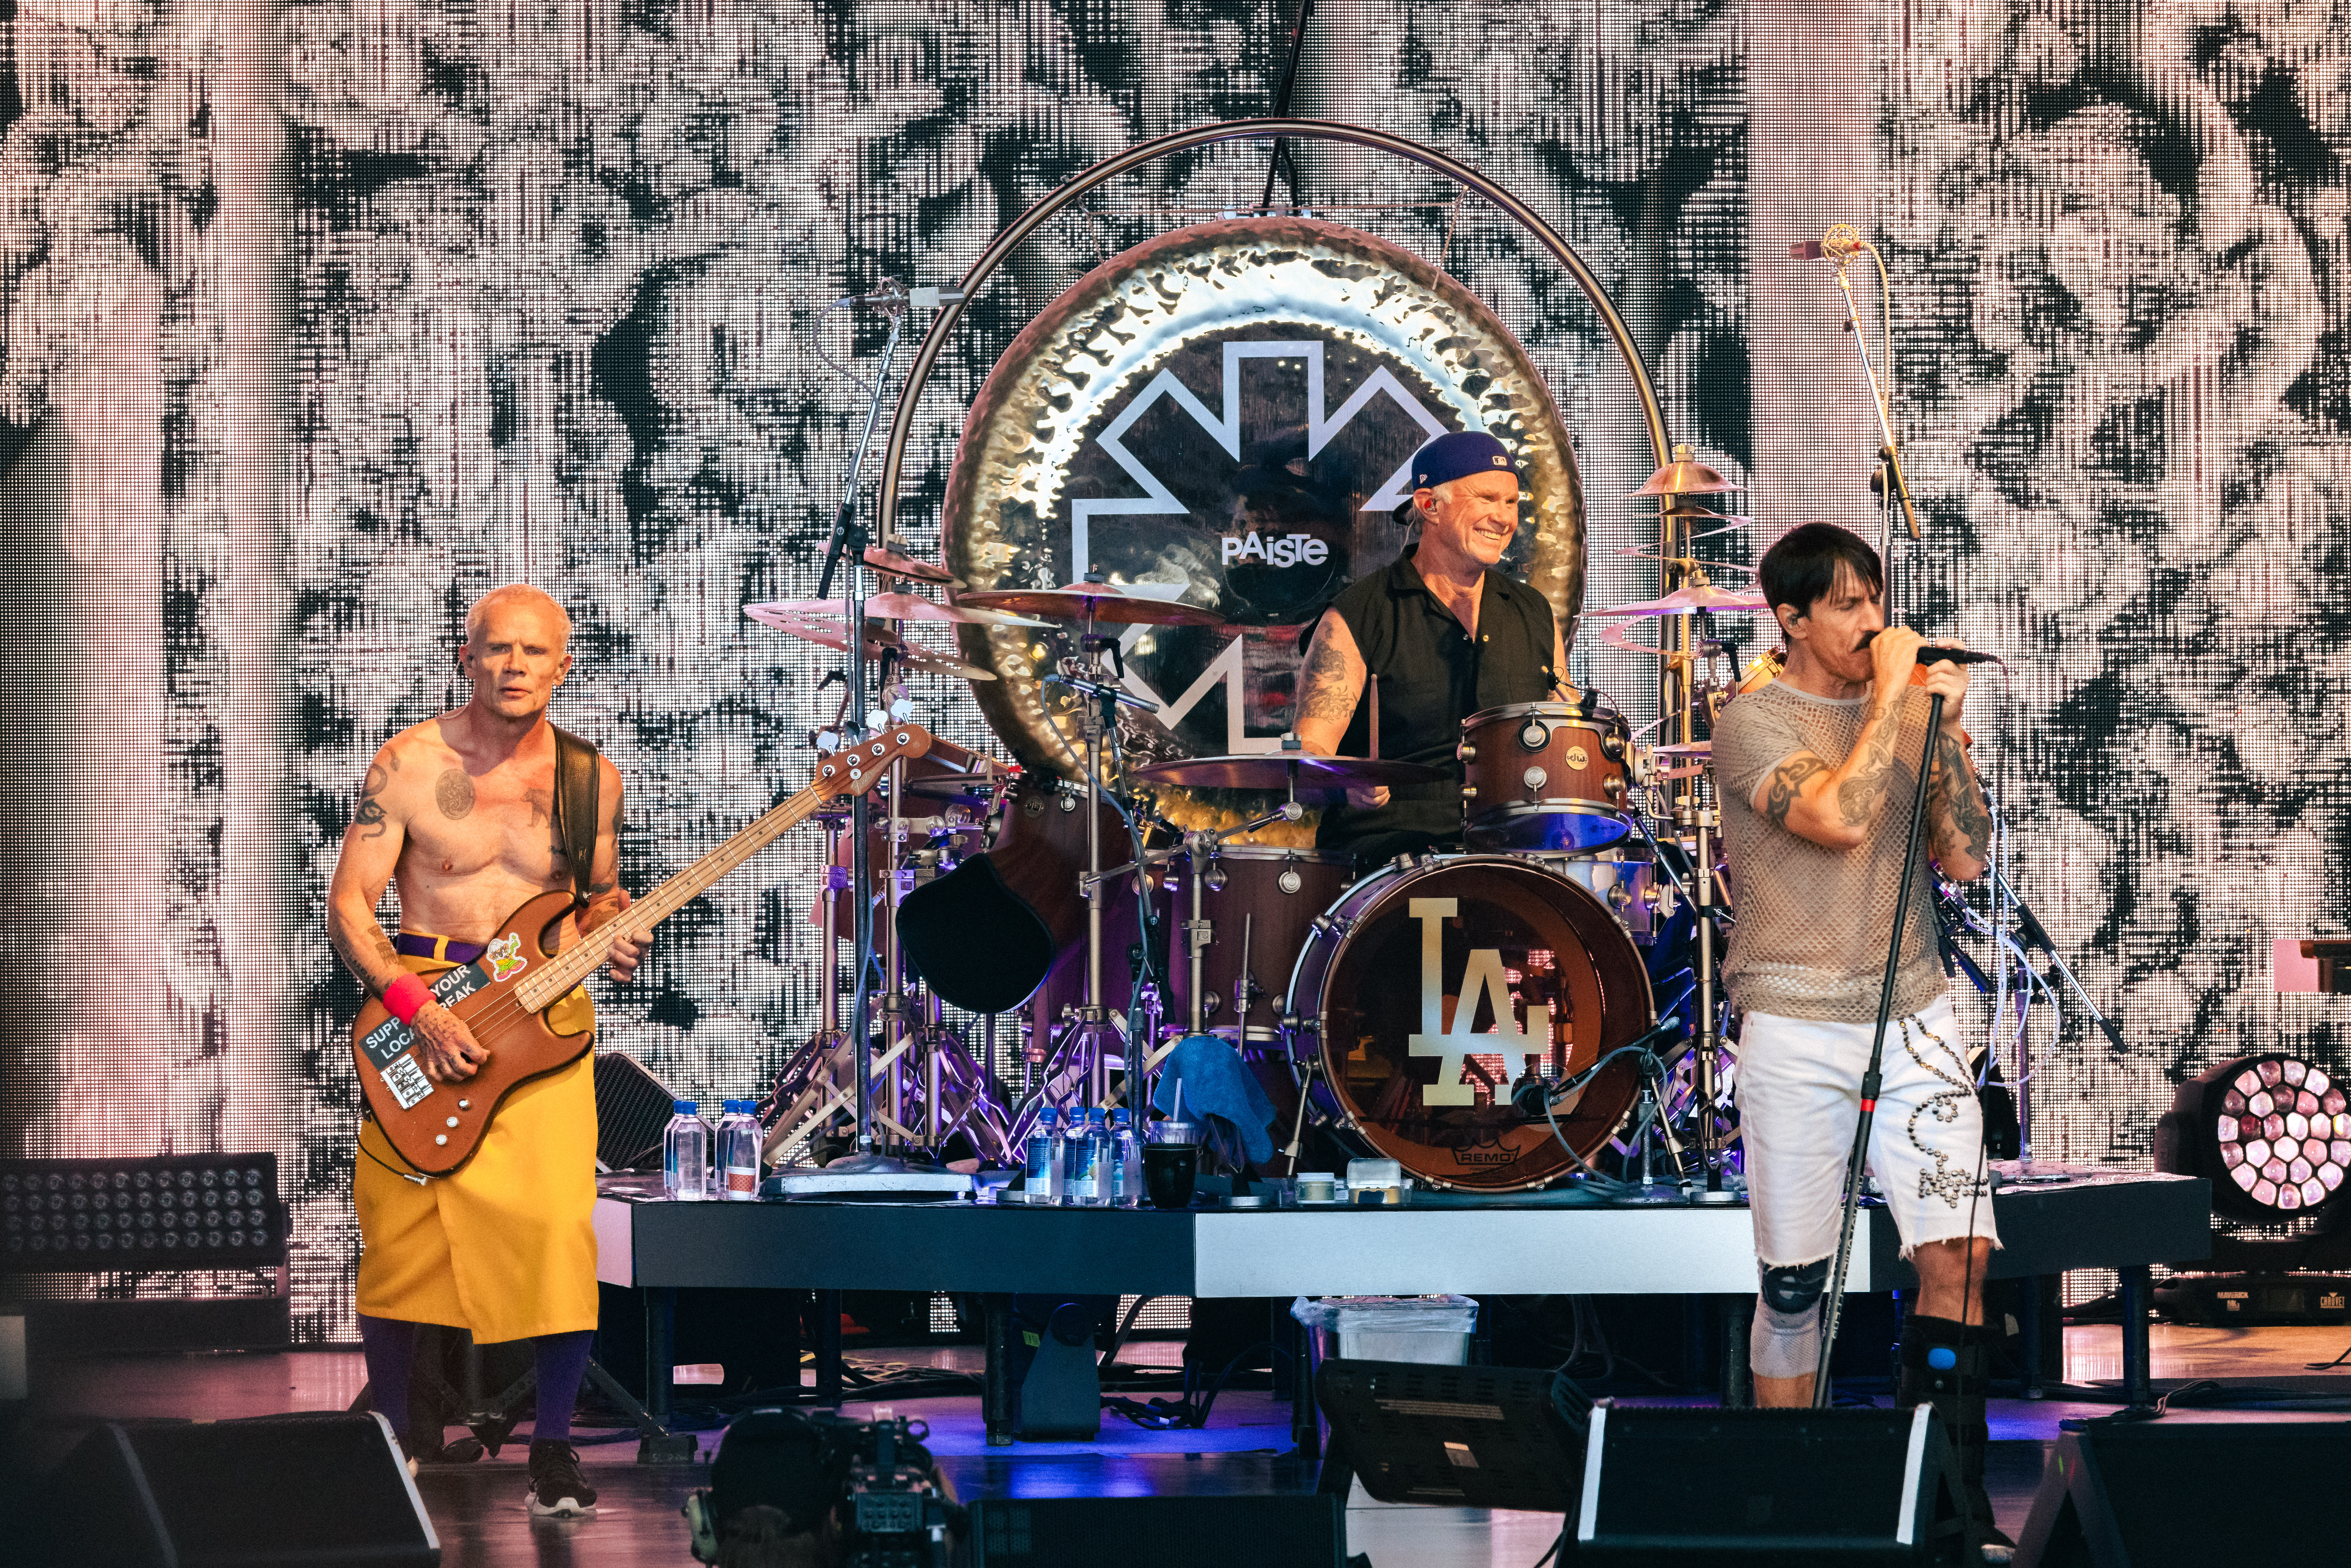 Red Hot Chili Peppers members Flea and Anthony Kiedis play on stage with drummer Chad Smith sporting a big ‘ole smile while on stage at the Utah First Credit Union Amphitheatre. Photo: @lmsorenson